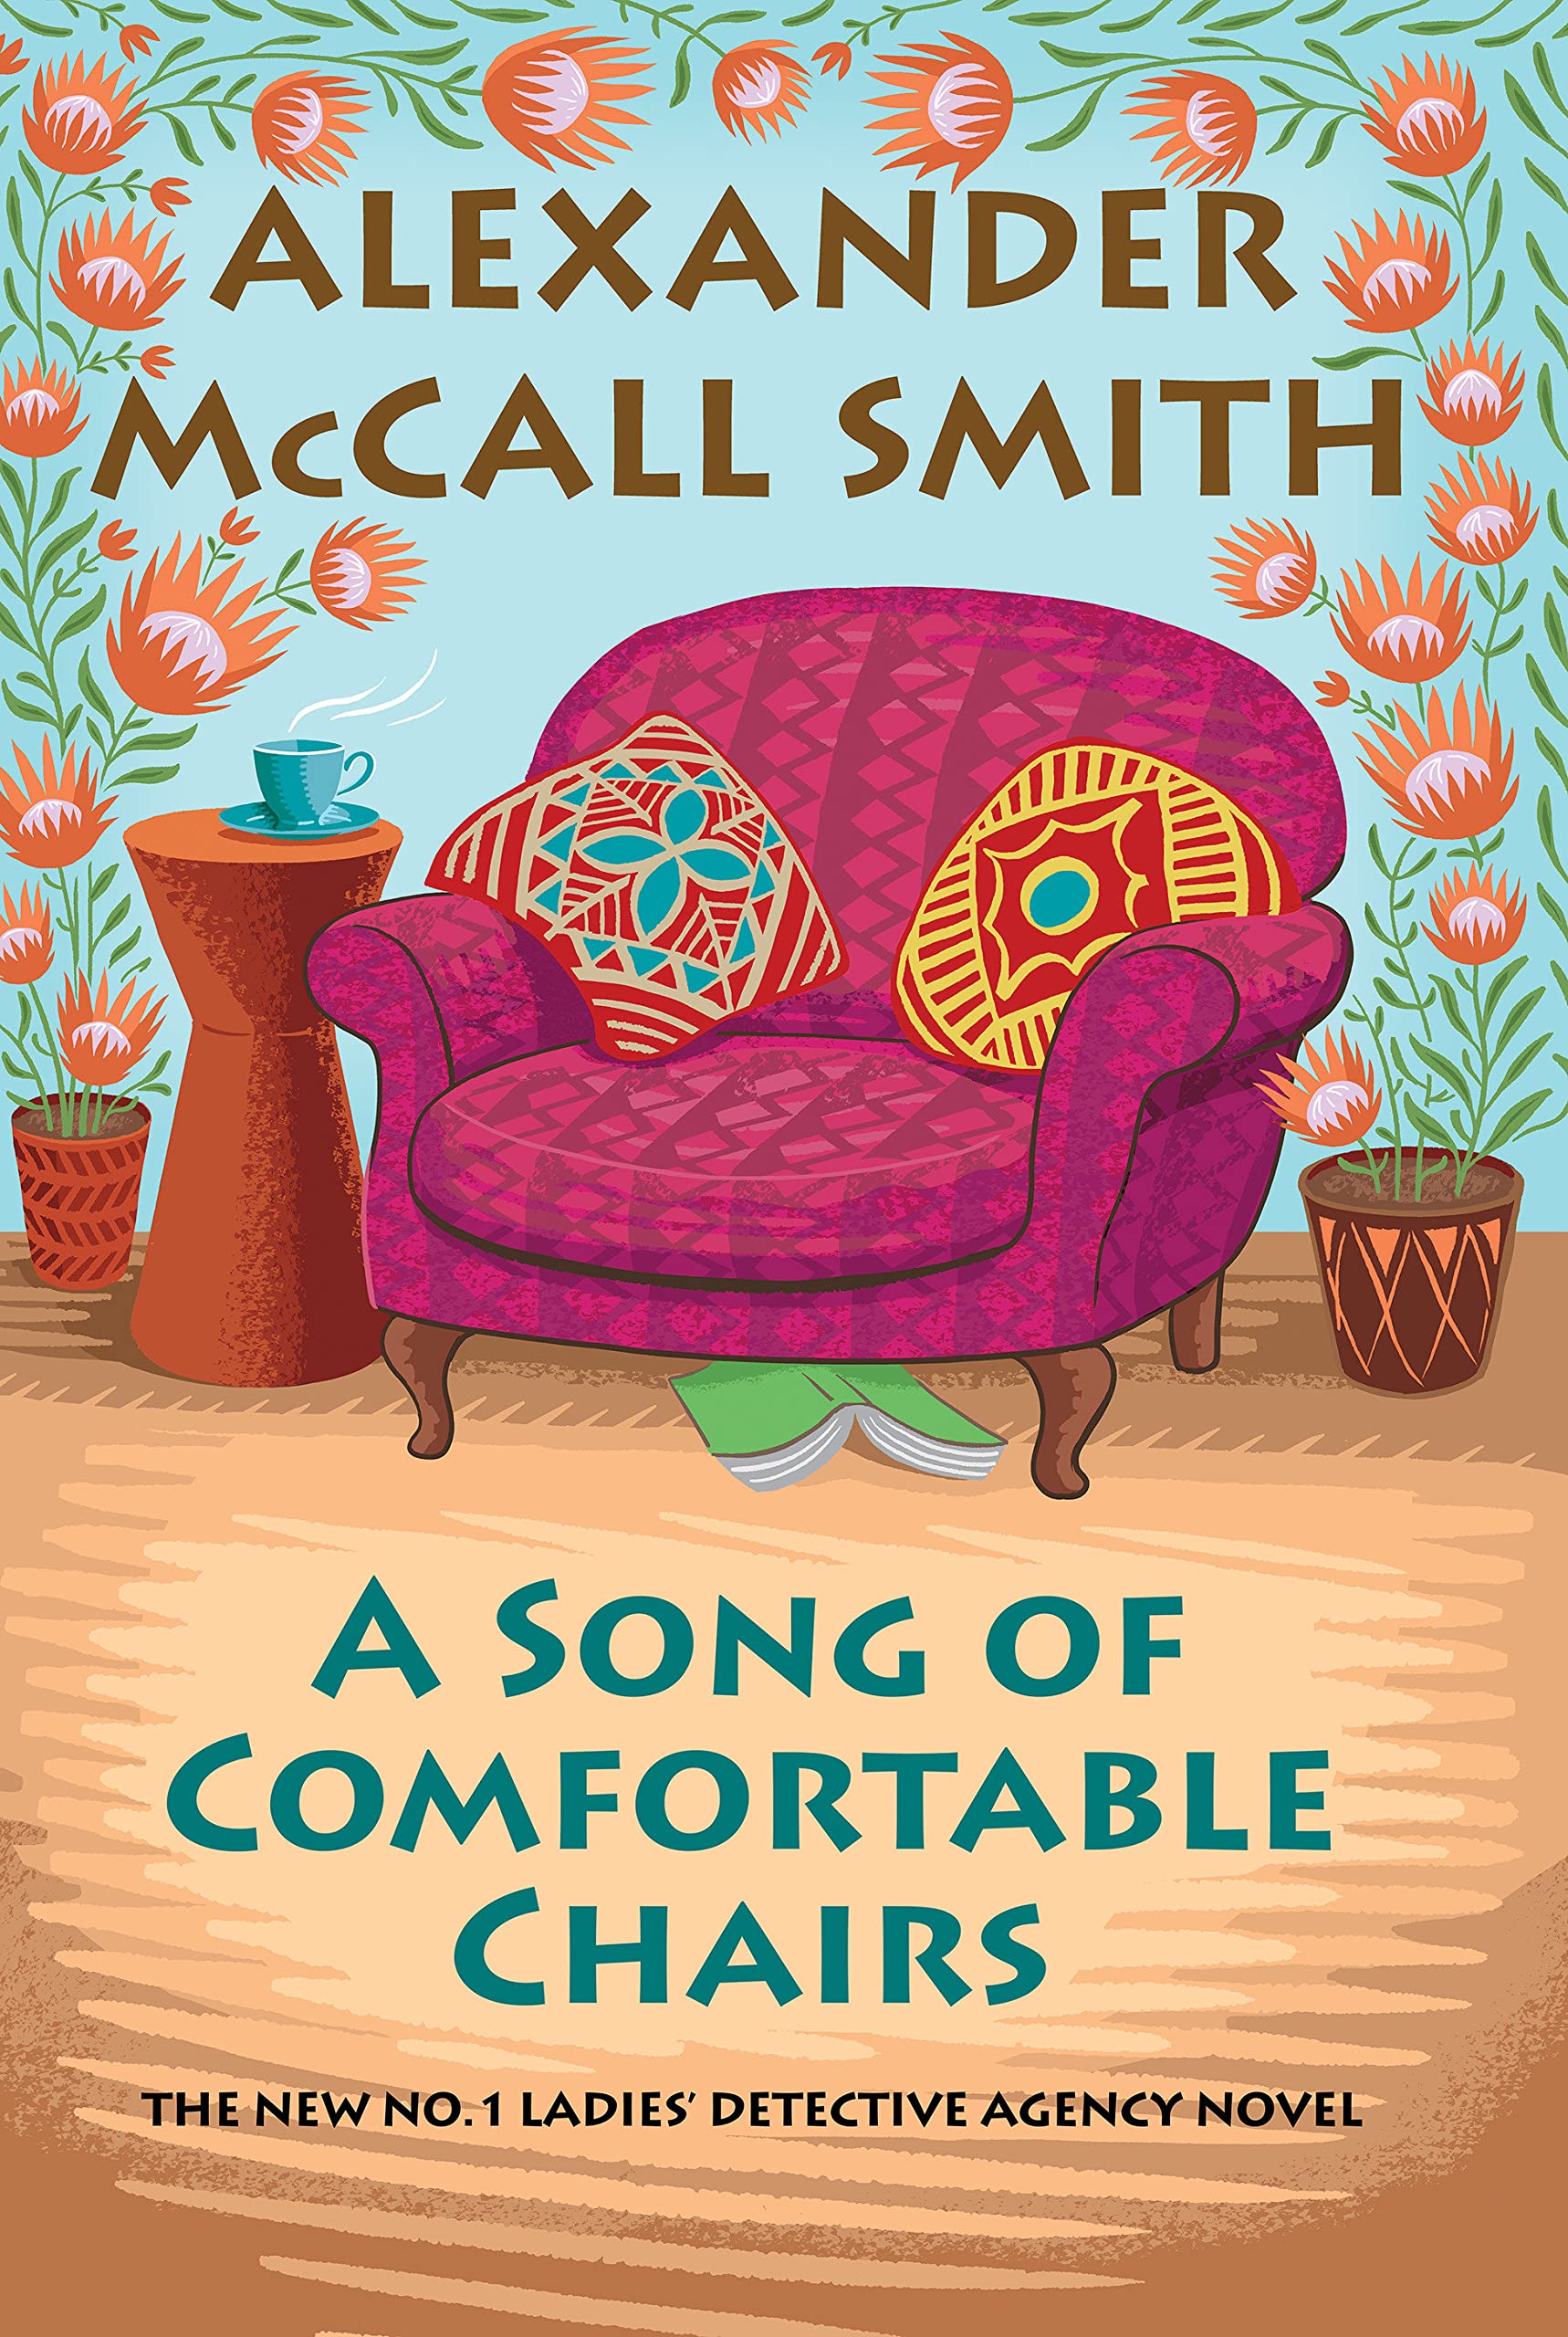 Image for "A Song of Comfortable Chairs"